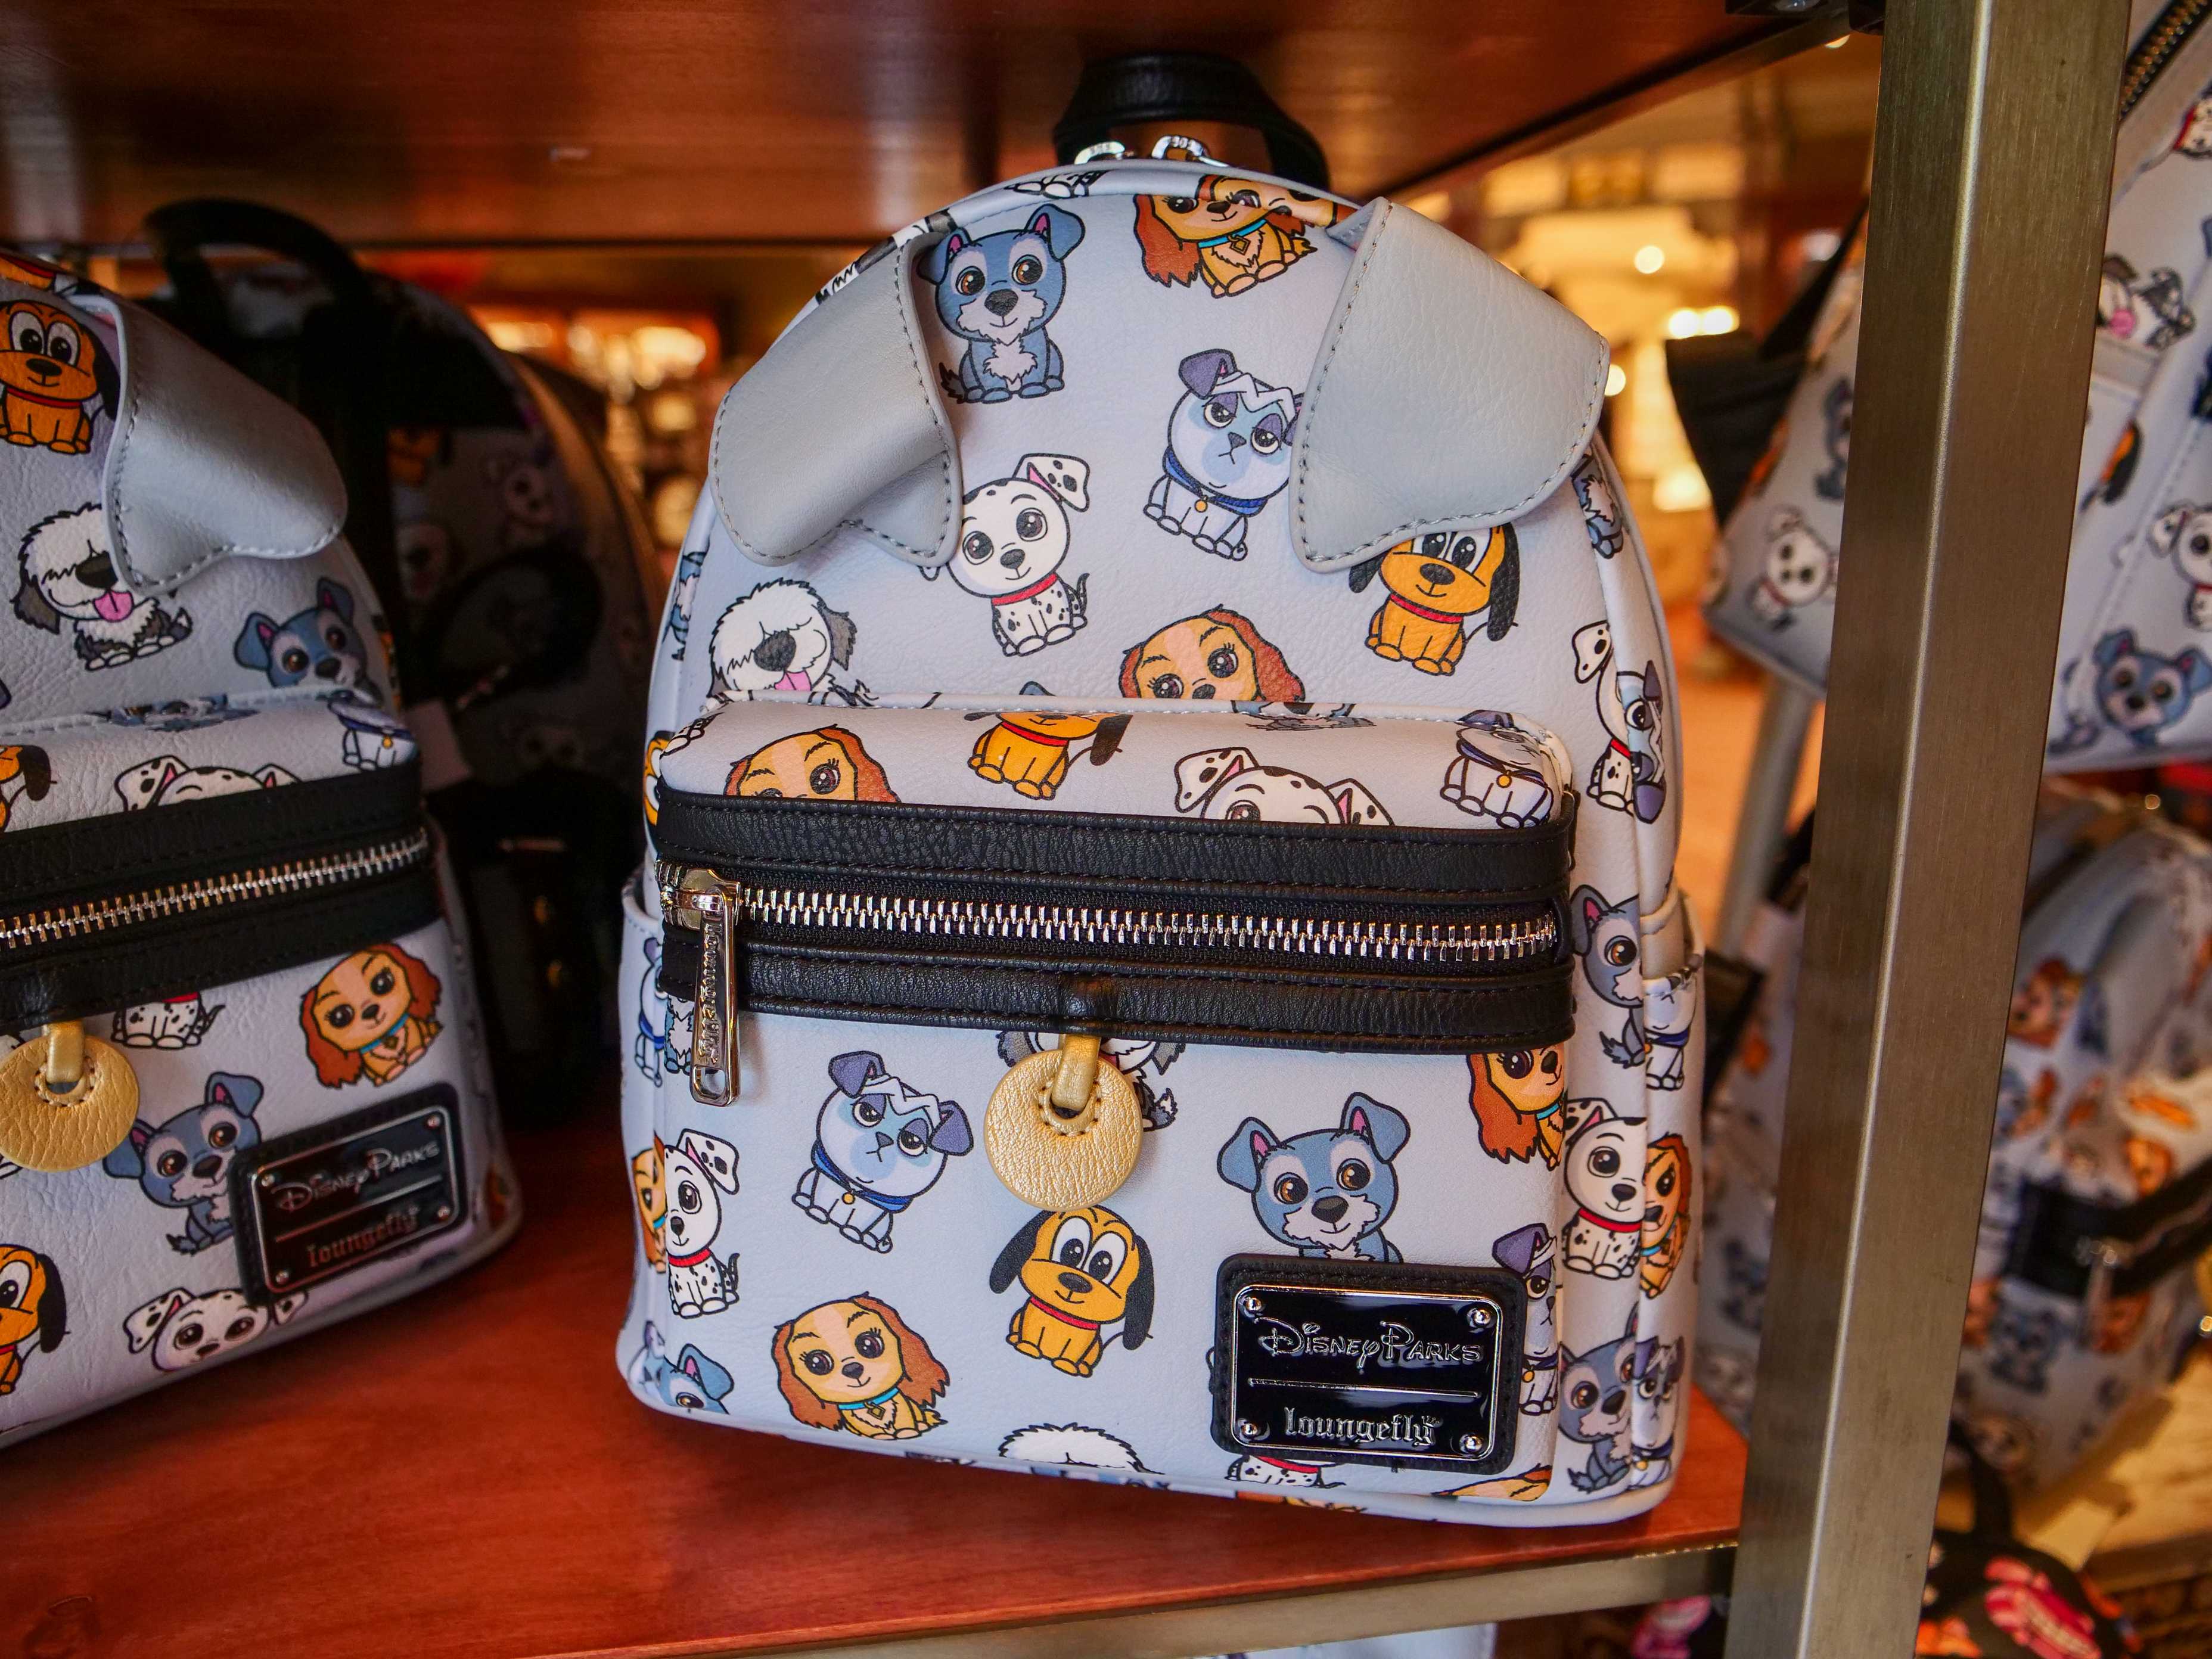 PHOTOS "Go Fetch" These NEW Disney Dogs & Cats Loungefly